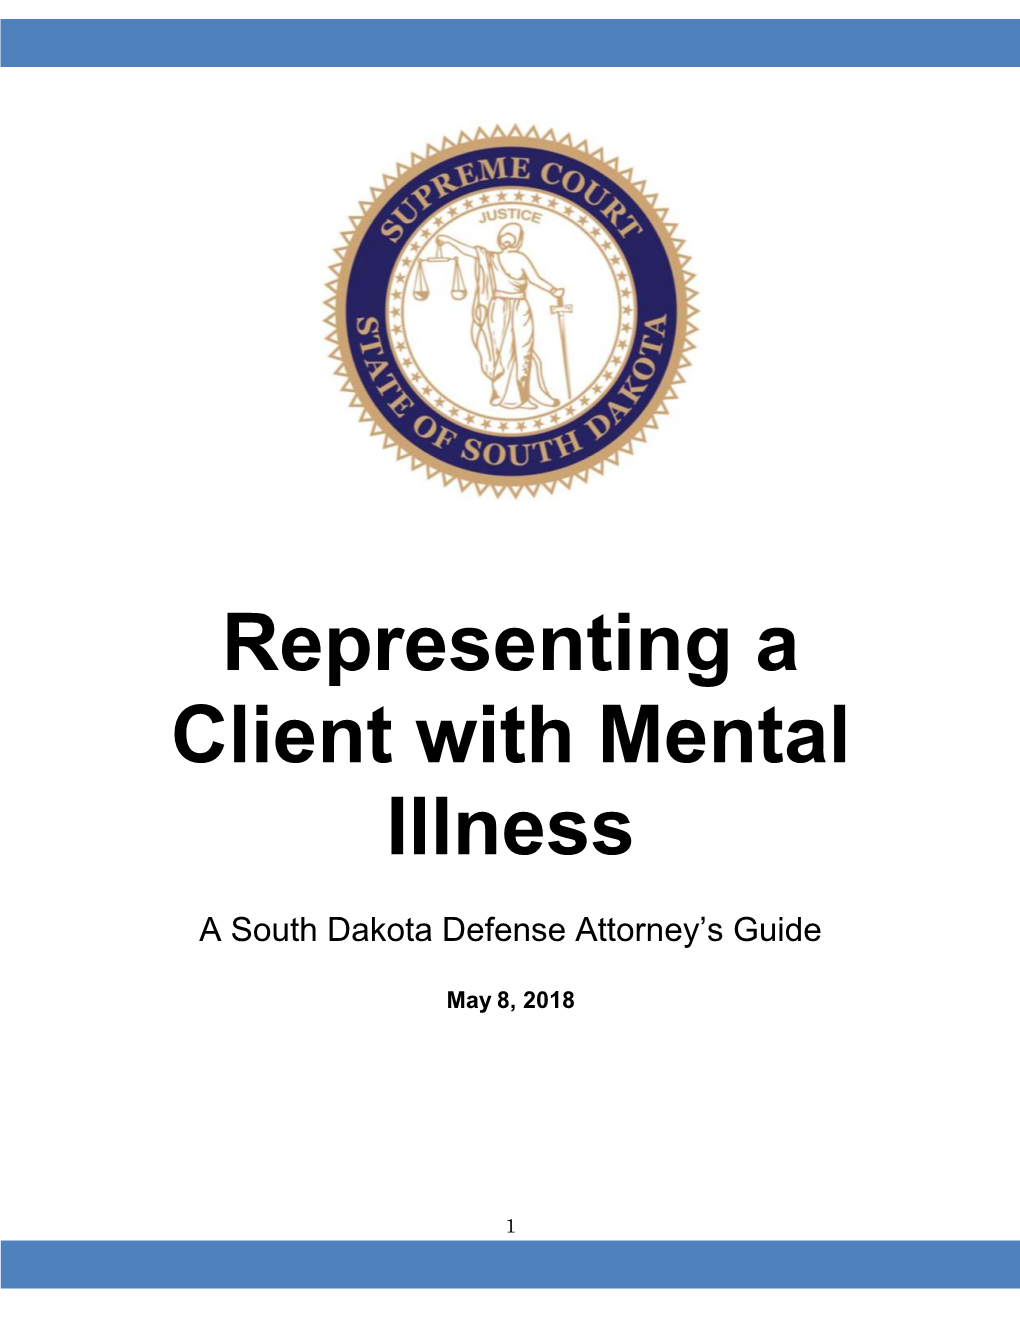 Defense Attorney Handbook for Representing a Client with Mental